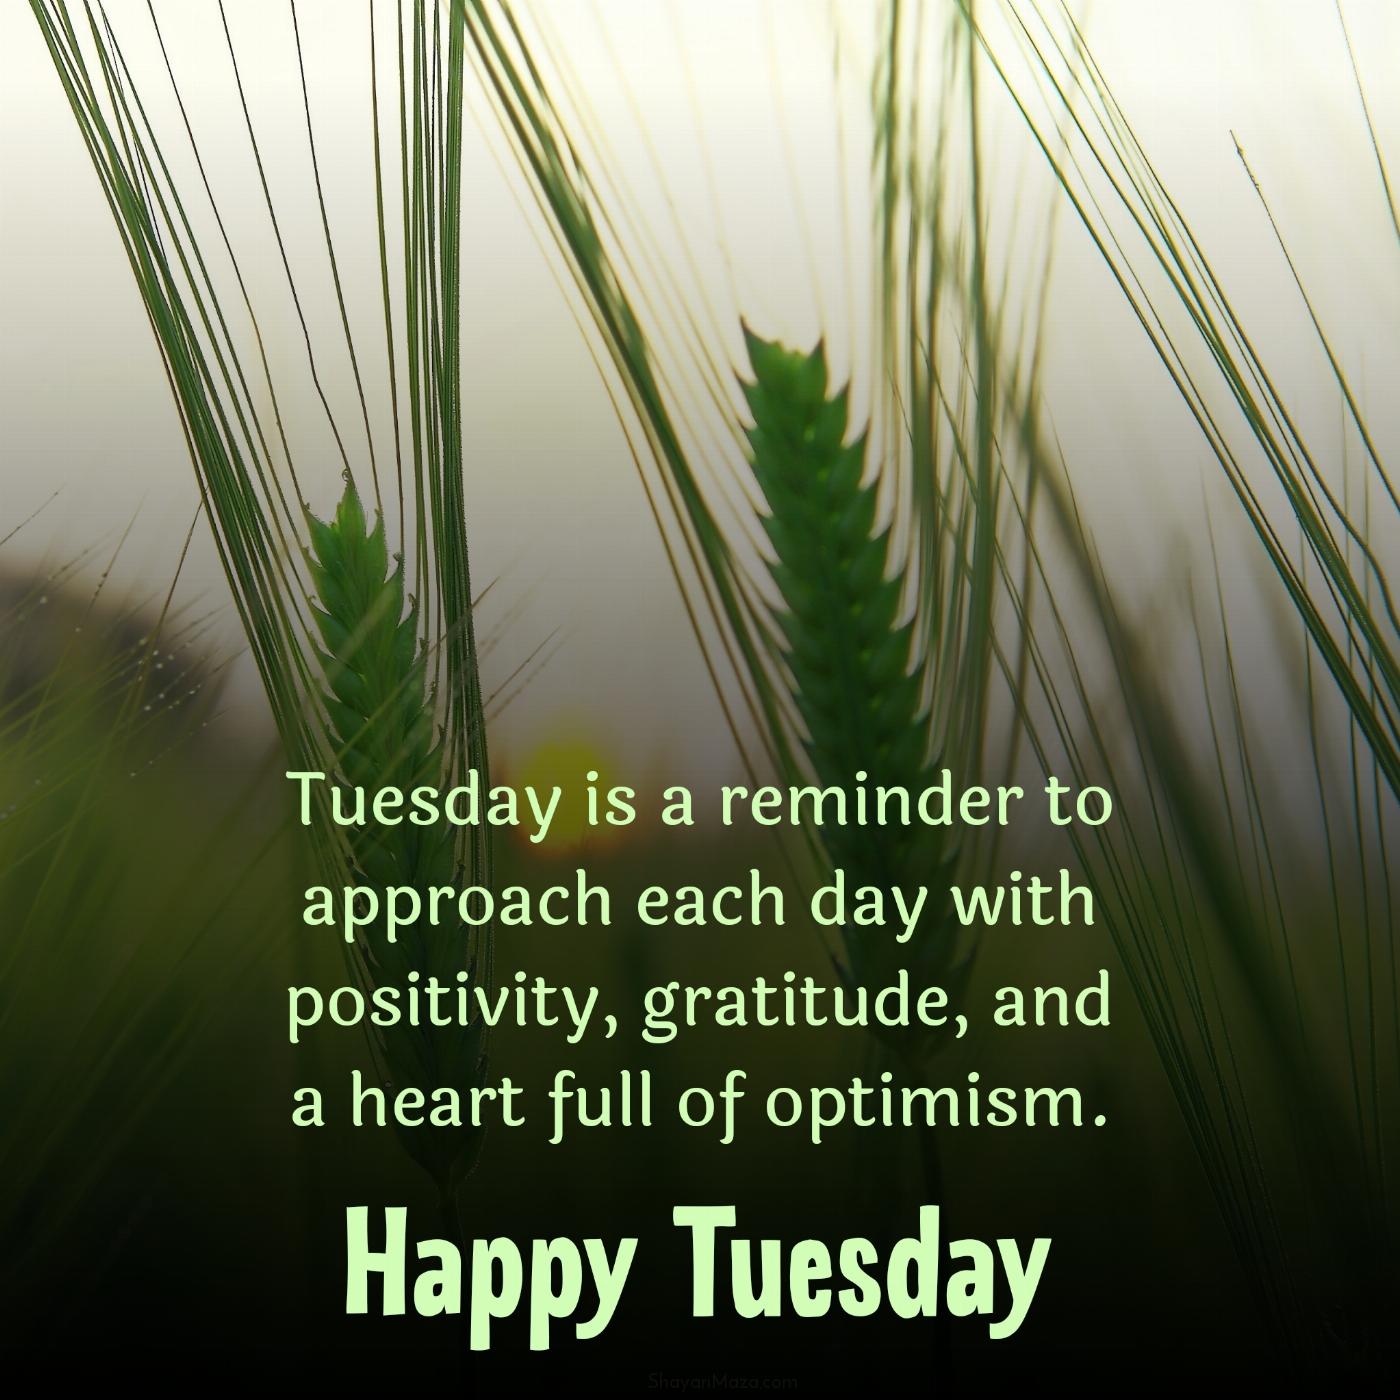 Tuesday is a reminder to approach each day with positivity